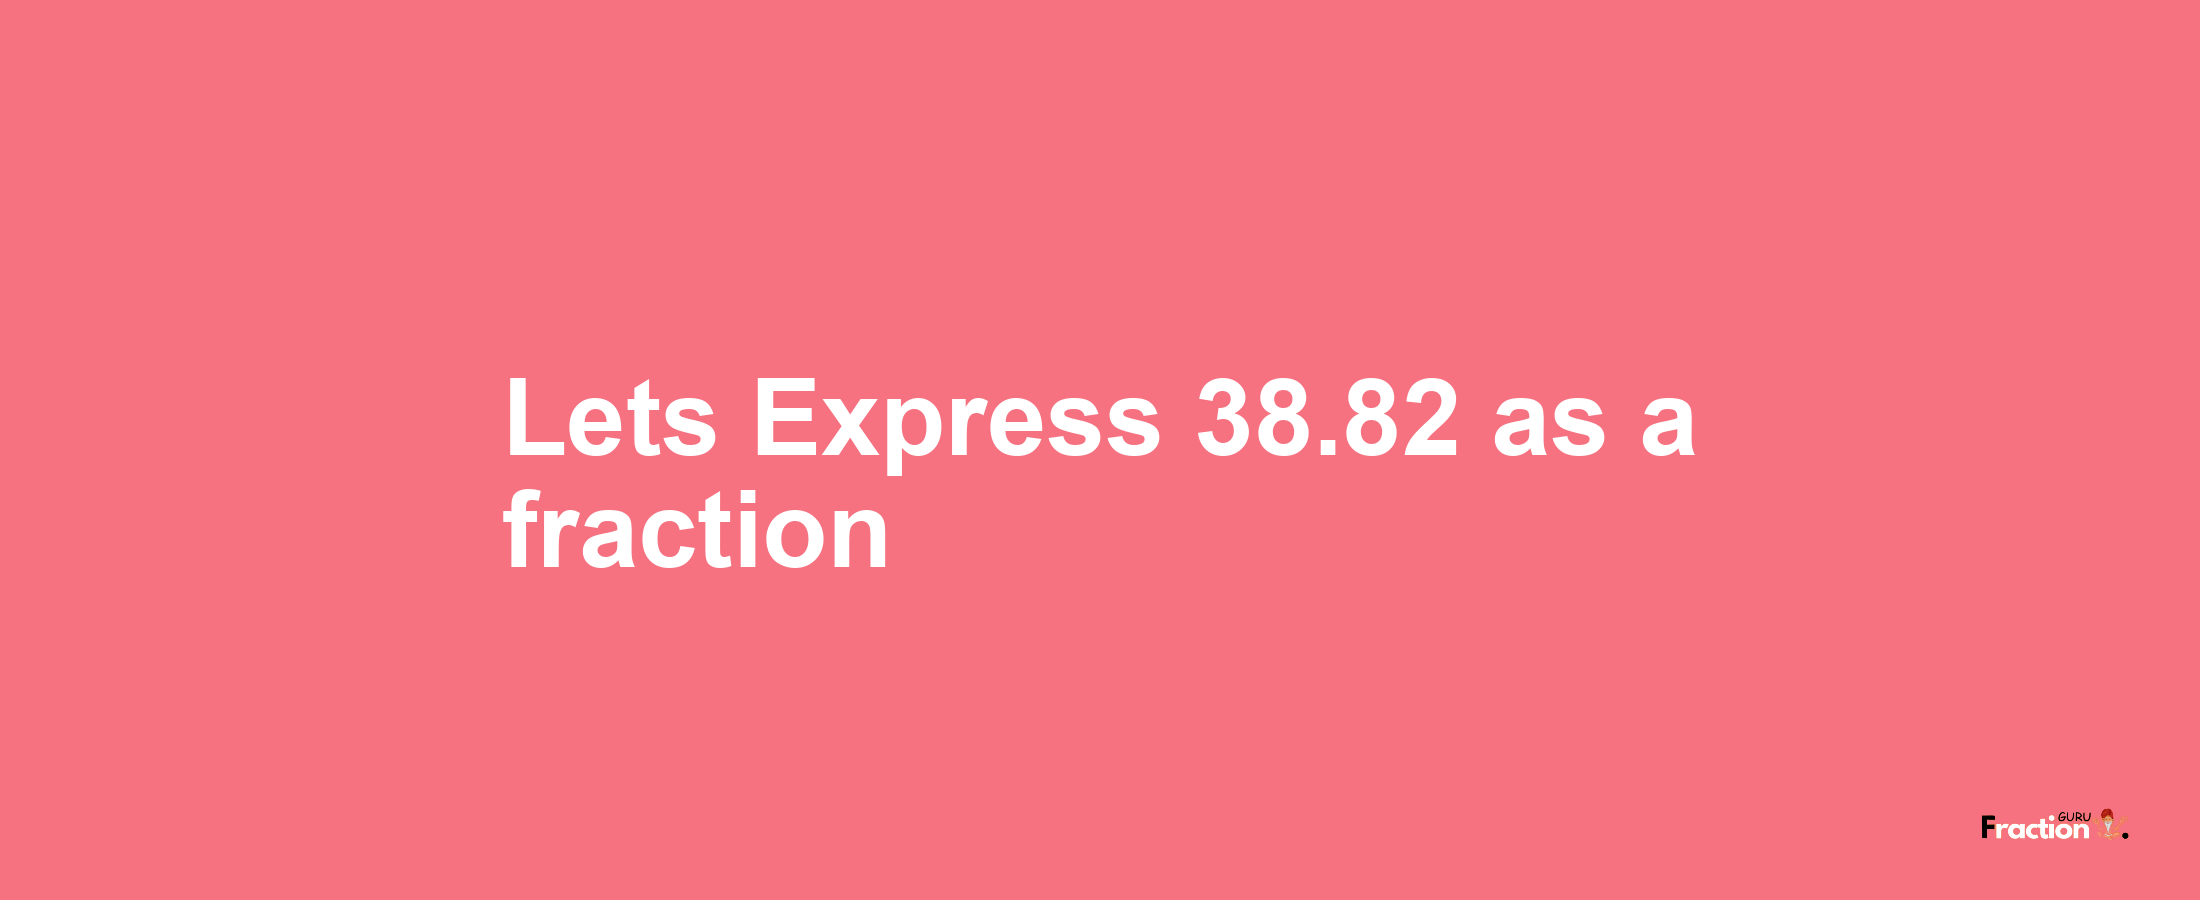 Lets Express 38.82 as afraction